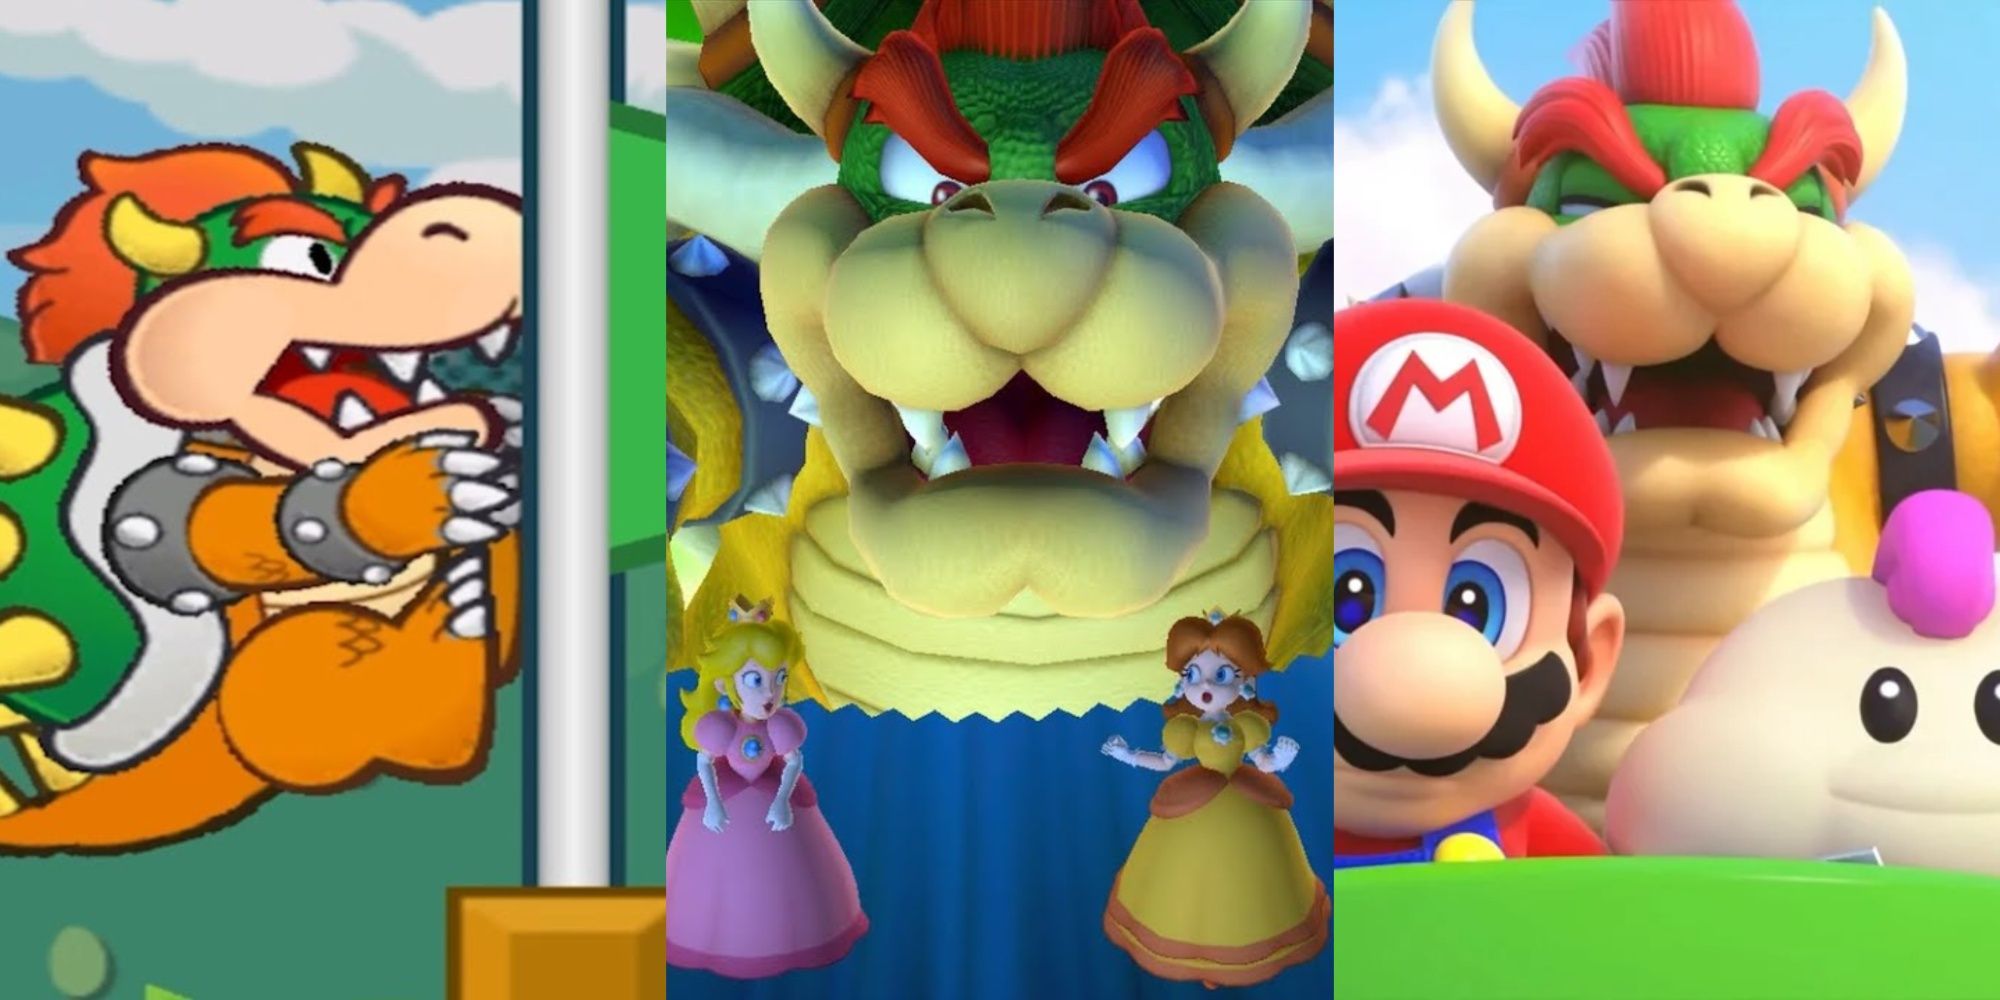 Bowser on a flagpole in Paper Mario, Bowser from Mario Party 10, Bowser in Super Mario RPG